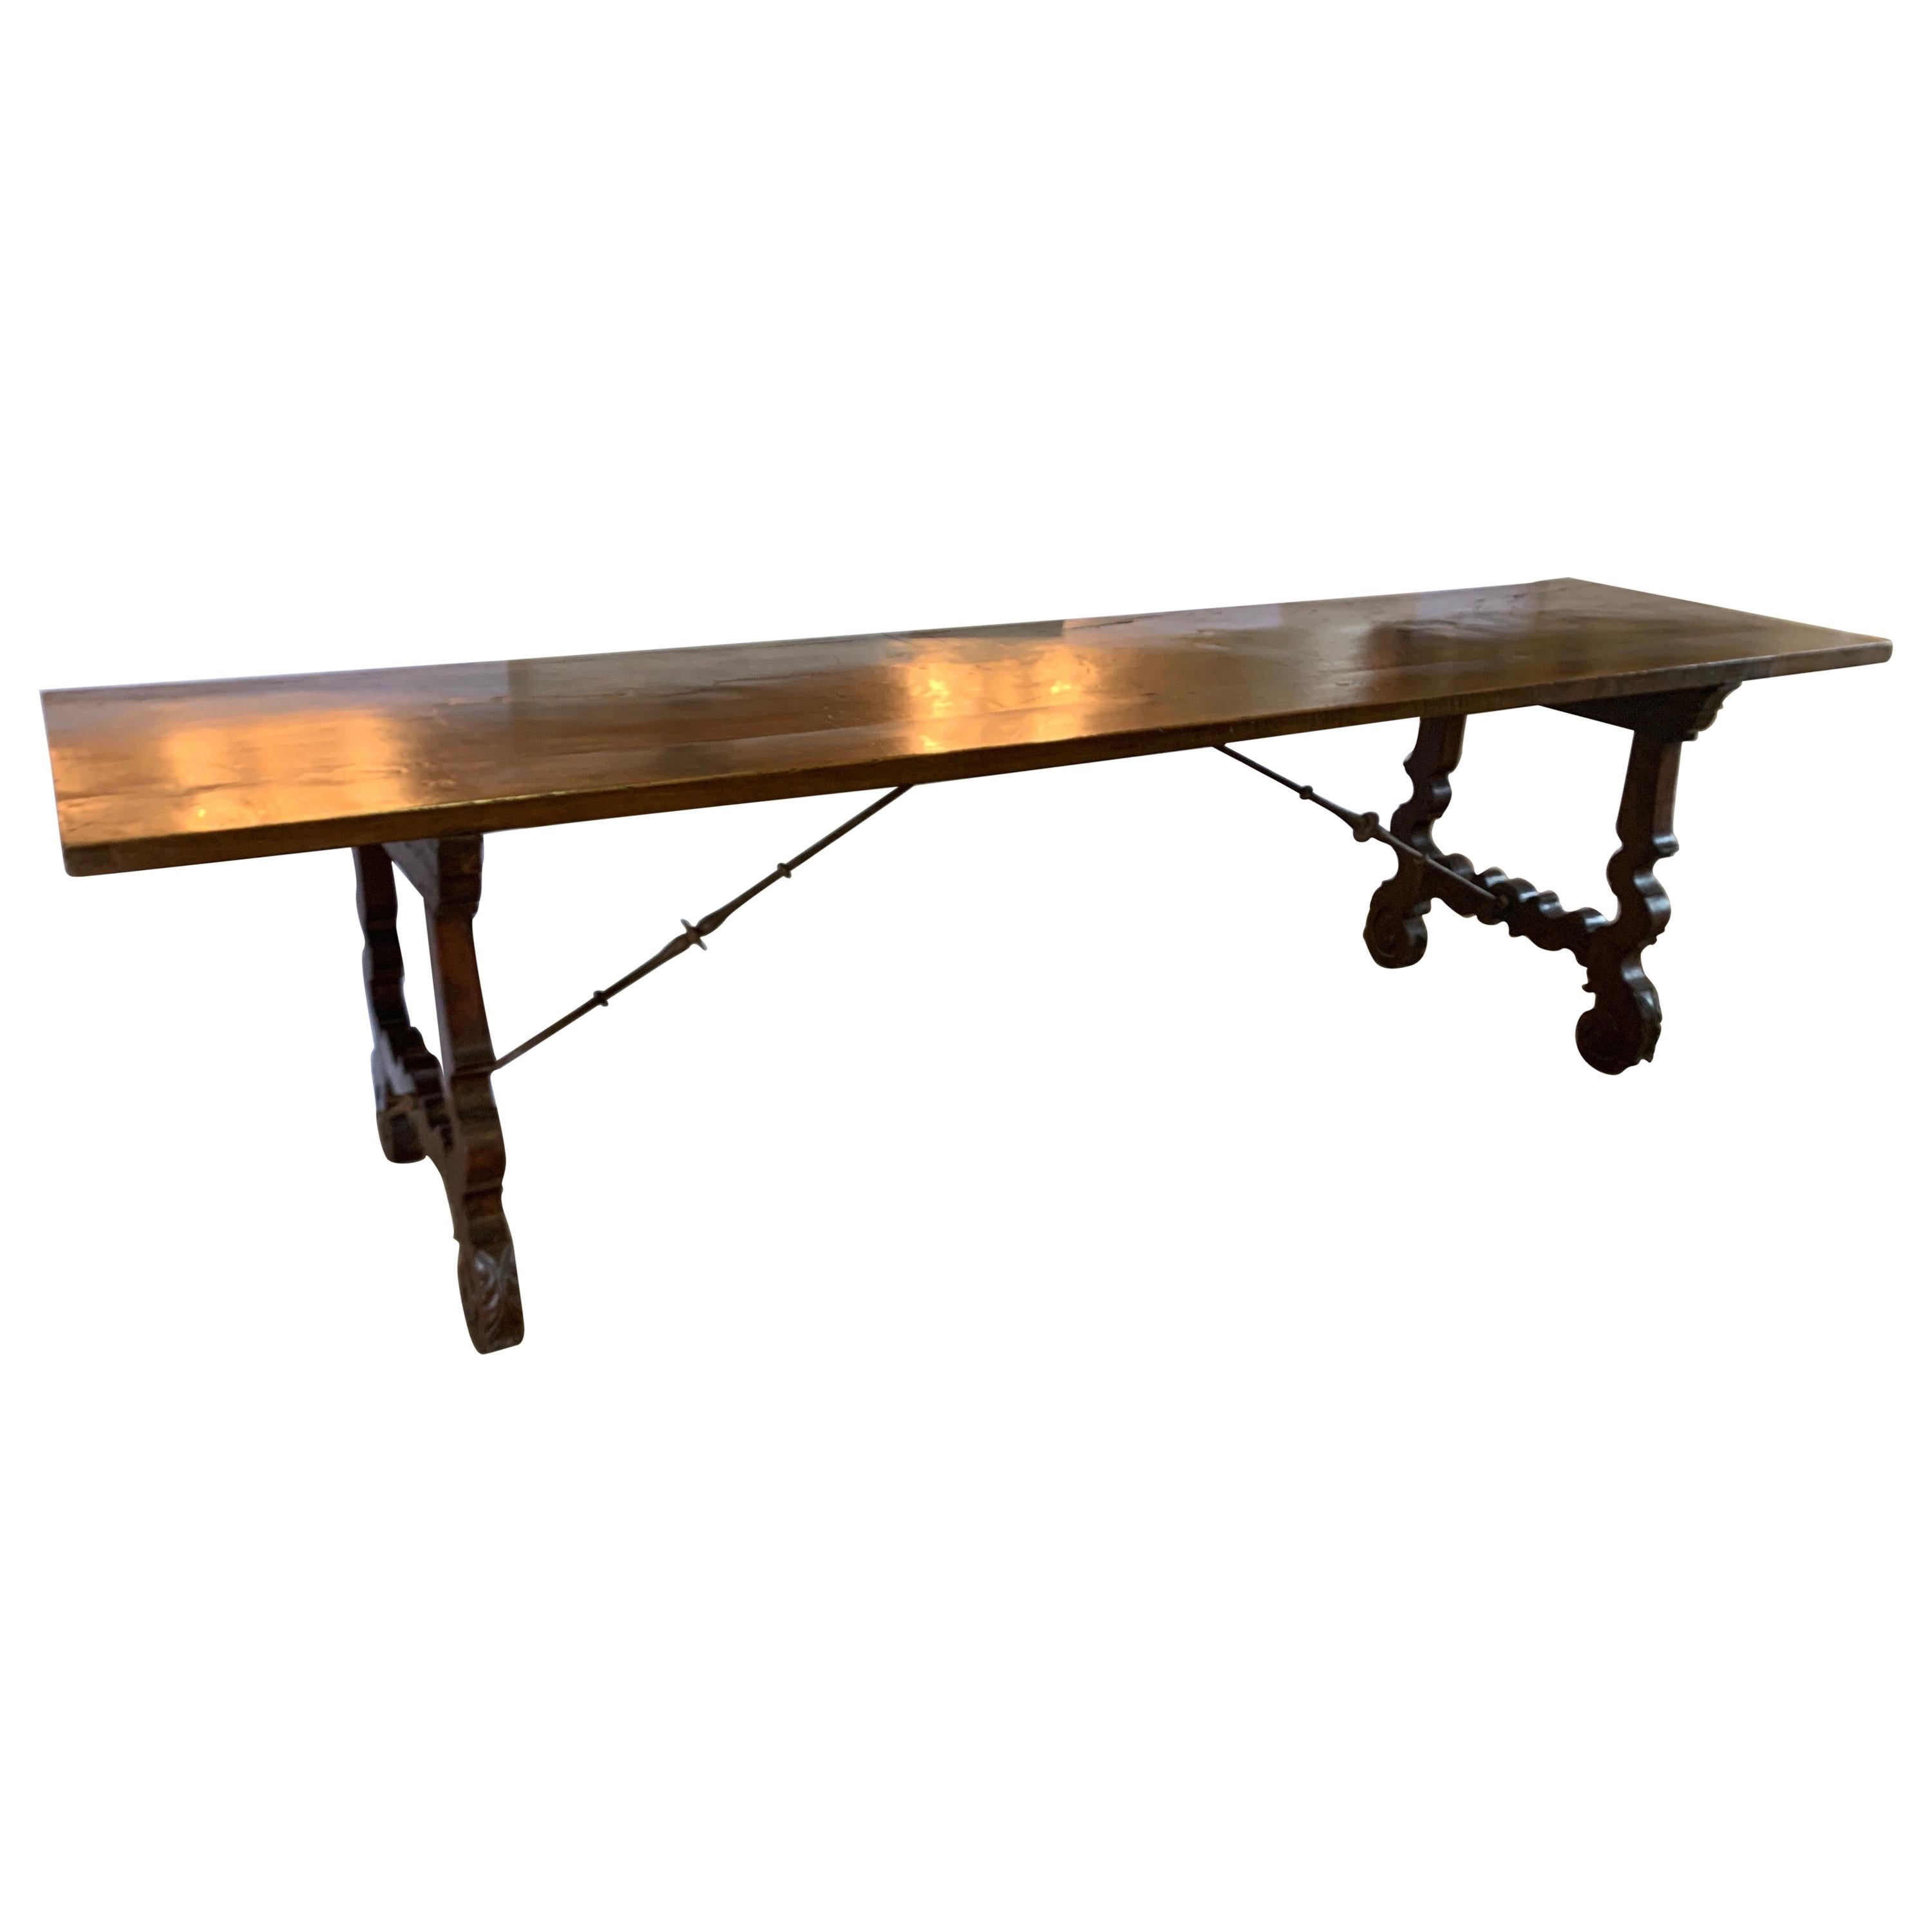 19th Century Walnut Dining Table With Iron Stretcher From Spain That Seats 10 